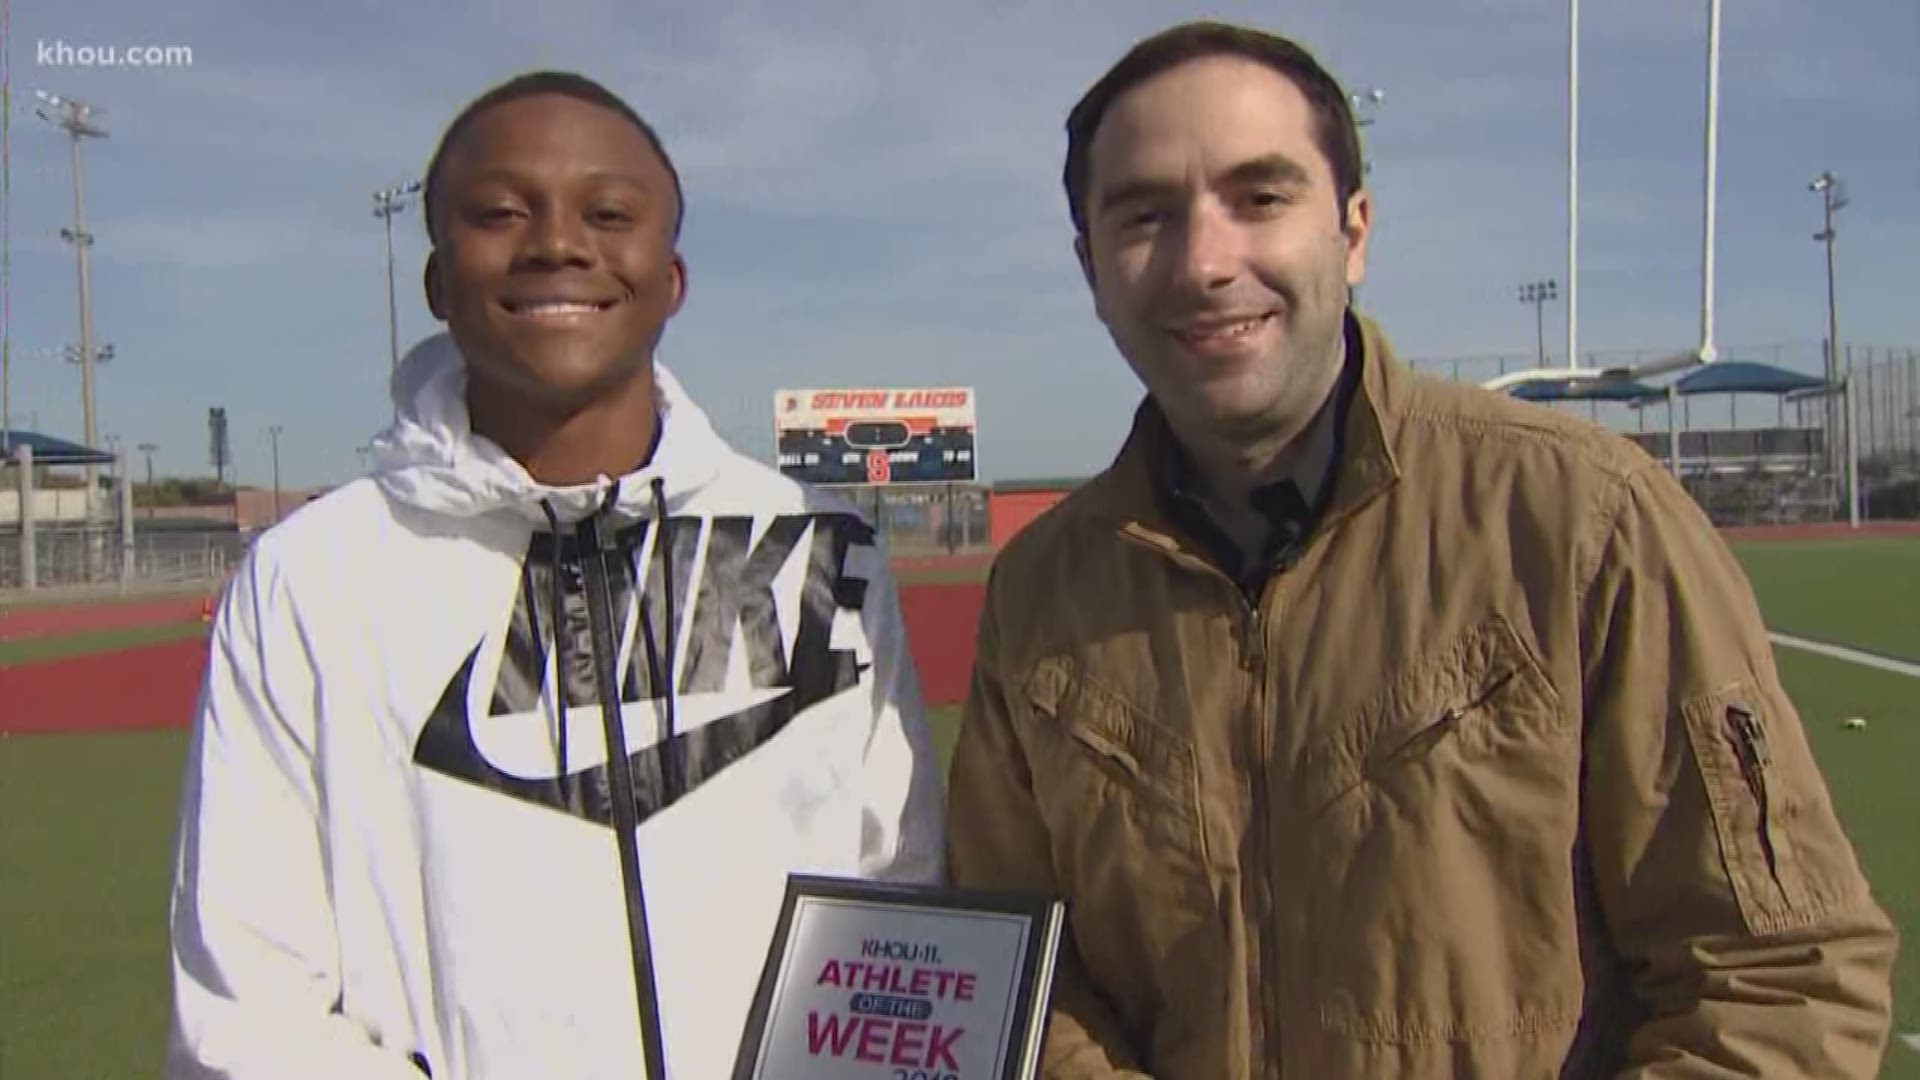 KHOU 11 Sports reporter Daniel Gotera is with the KHOU 11 Athlete Of The Week, Seven Lakes High School track and football star Lance Broome.